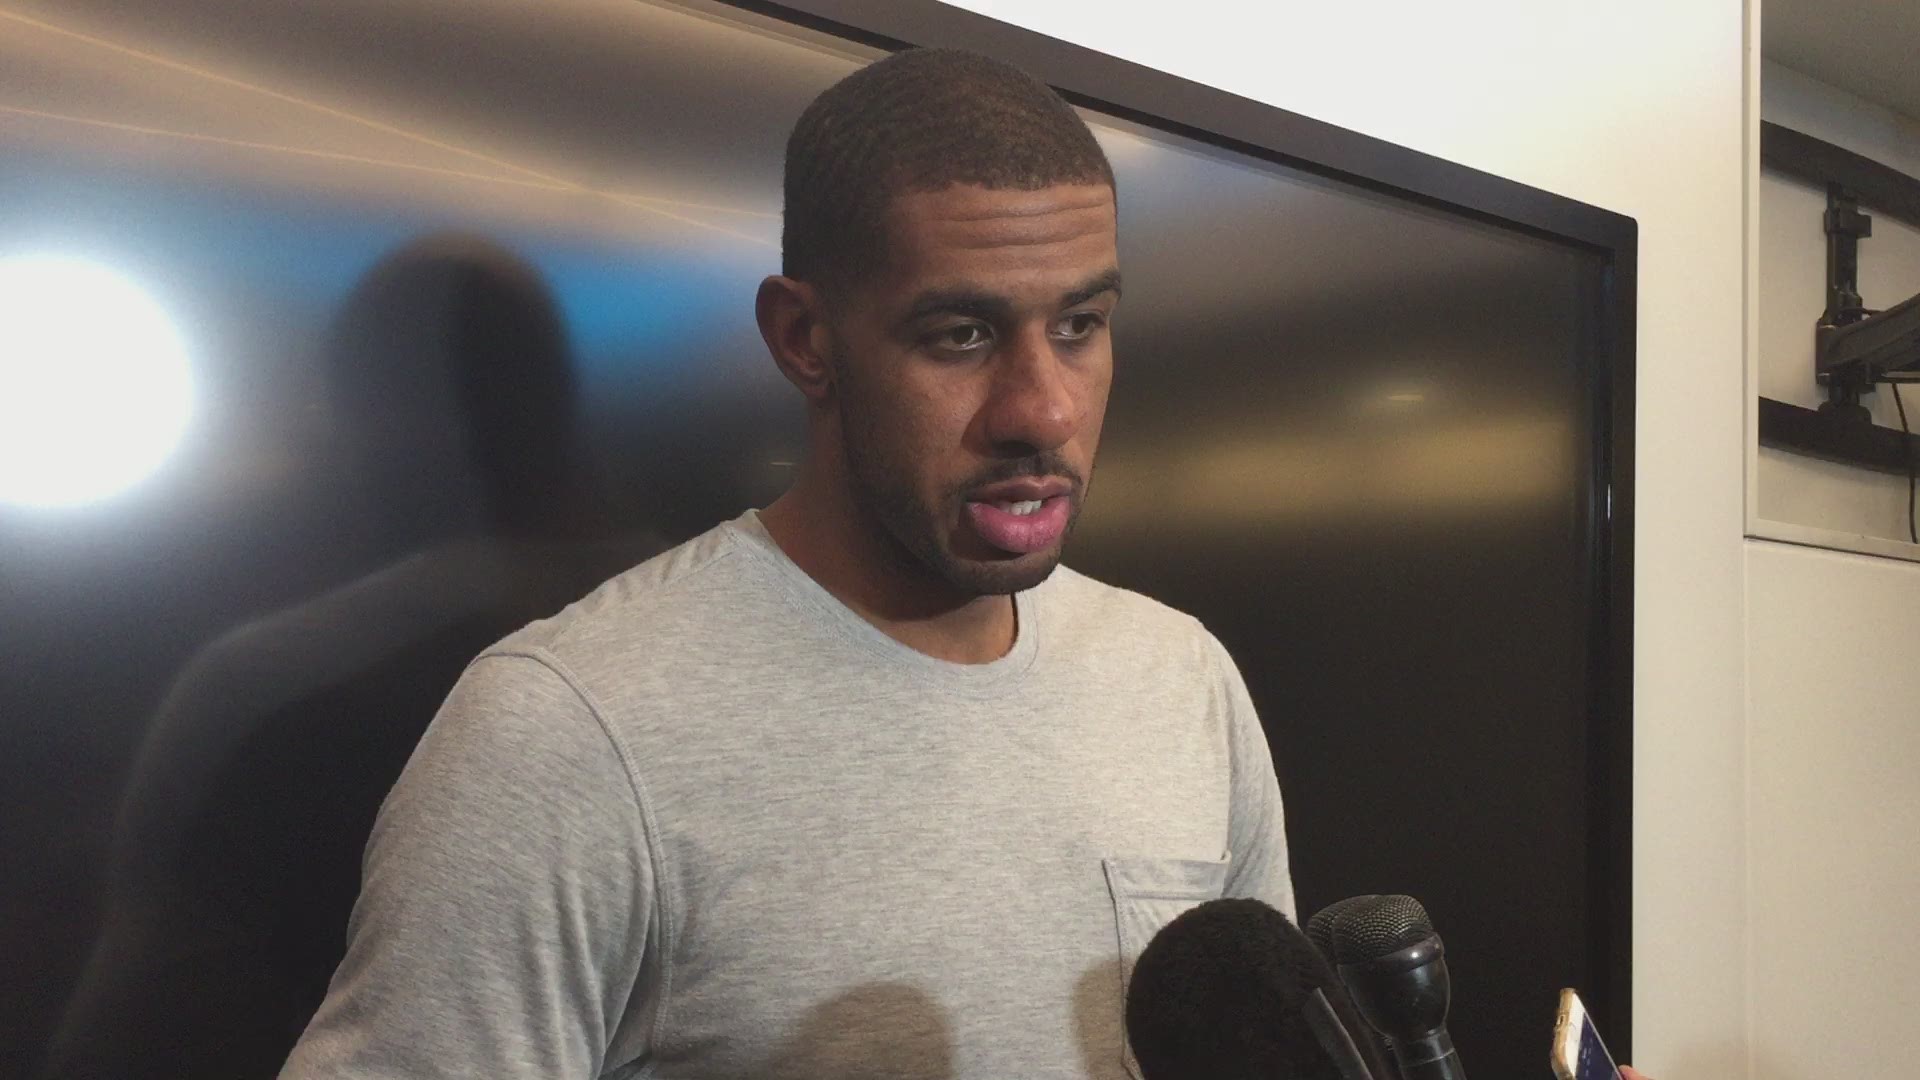 LaMarcus Aldridge talks about the loss to the Jazz